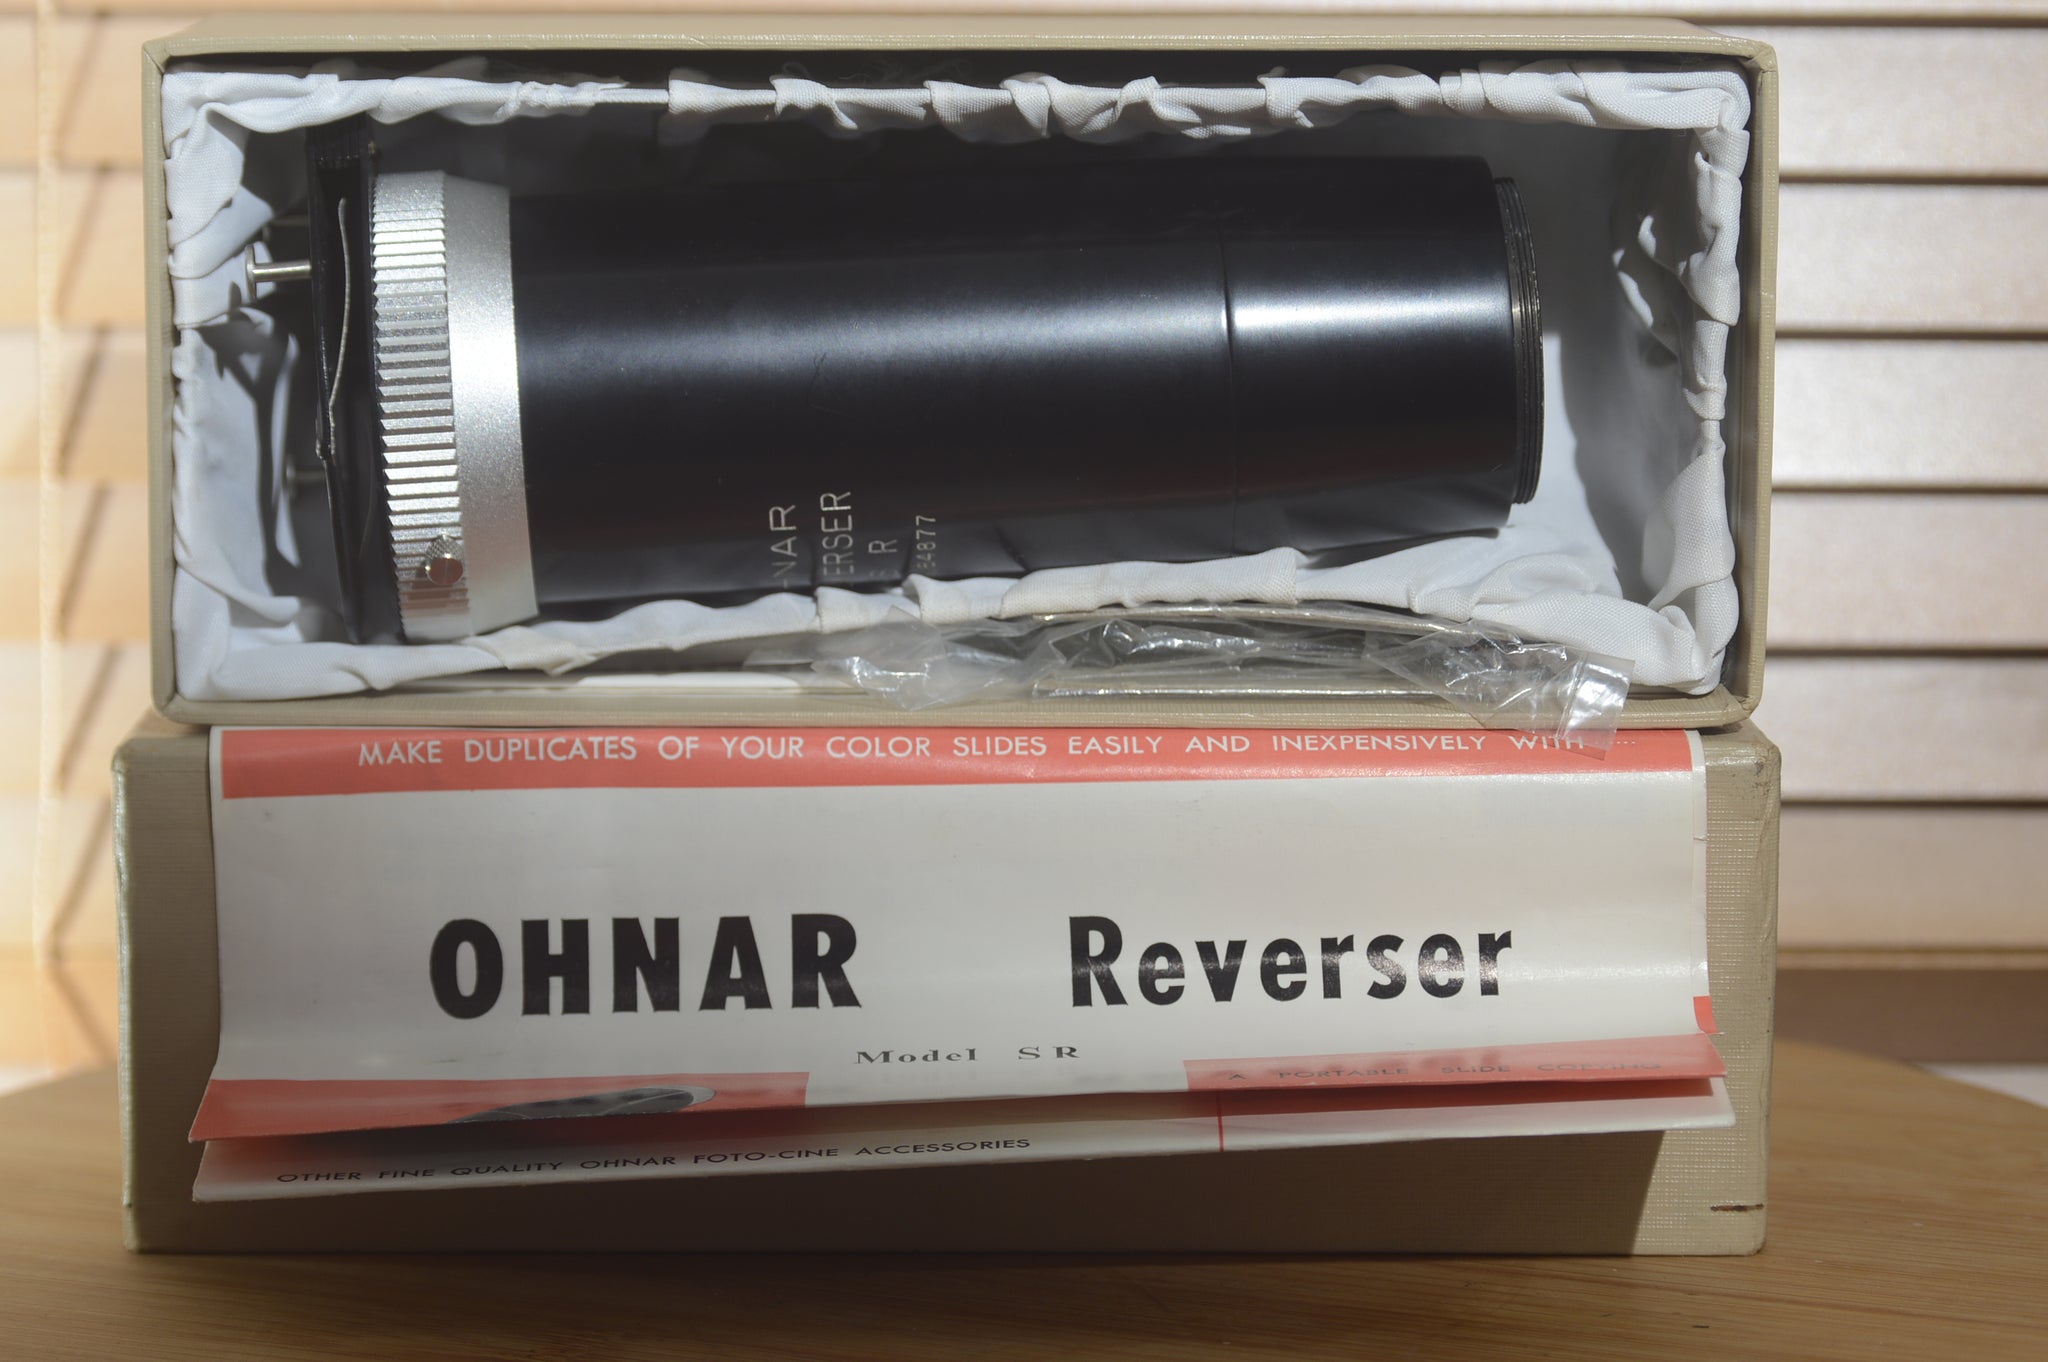 Boxed Ohnar M42 Reversing Slide Duplicator Model SR. Fantastic condition for it's age. - RewindCameras quality vintage cameras, fully tested and serviced